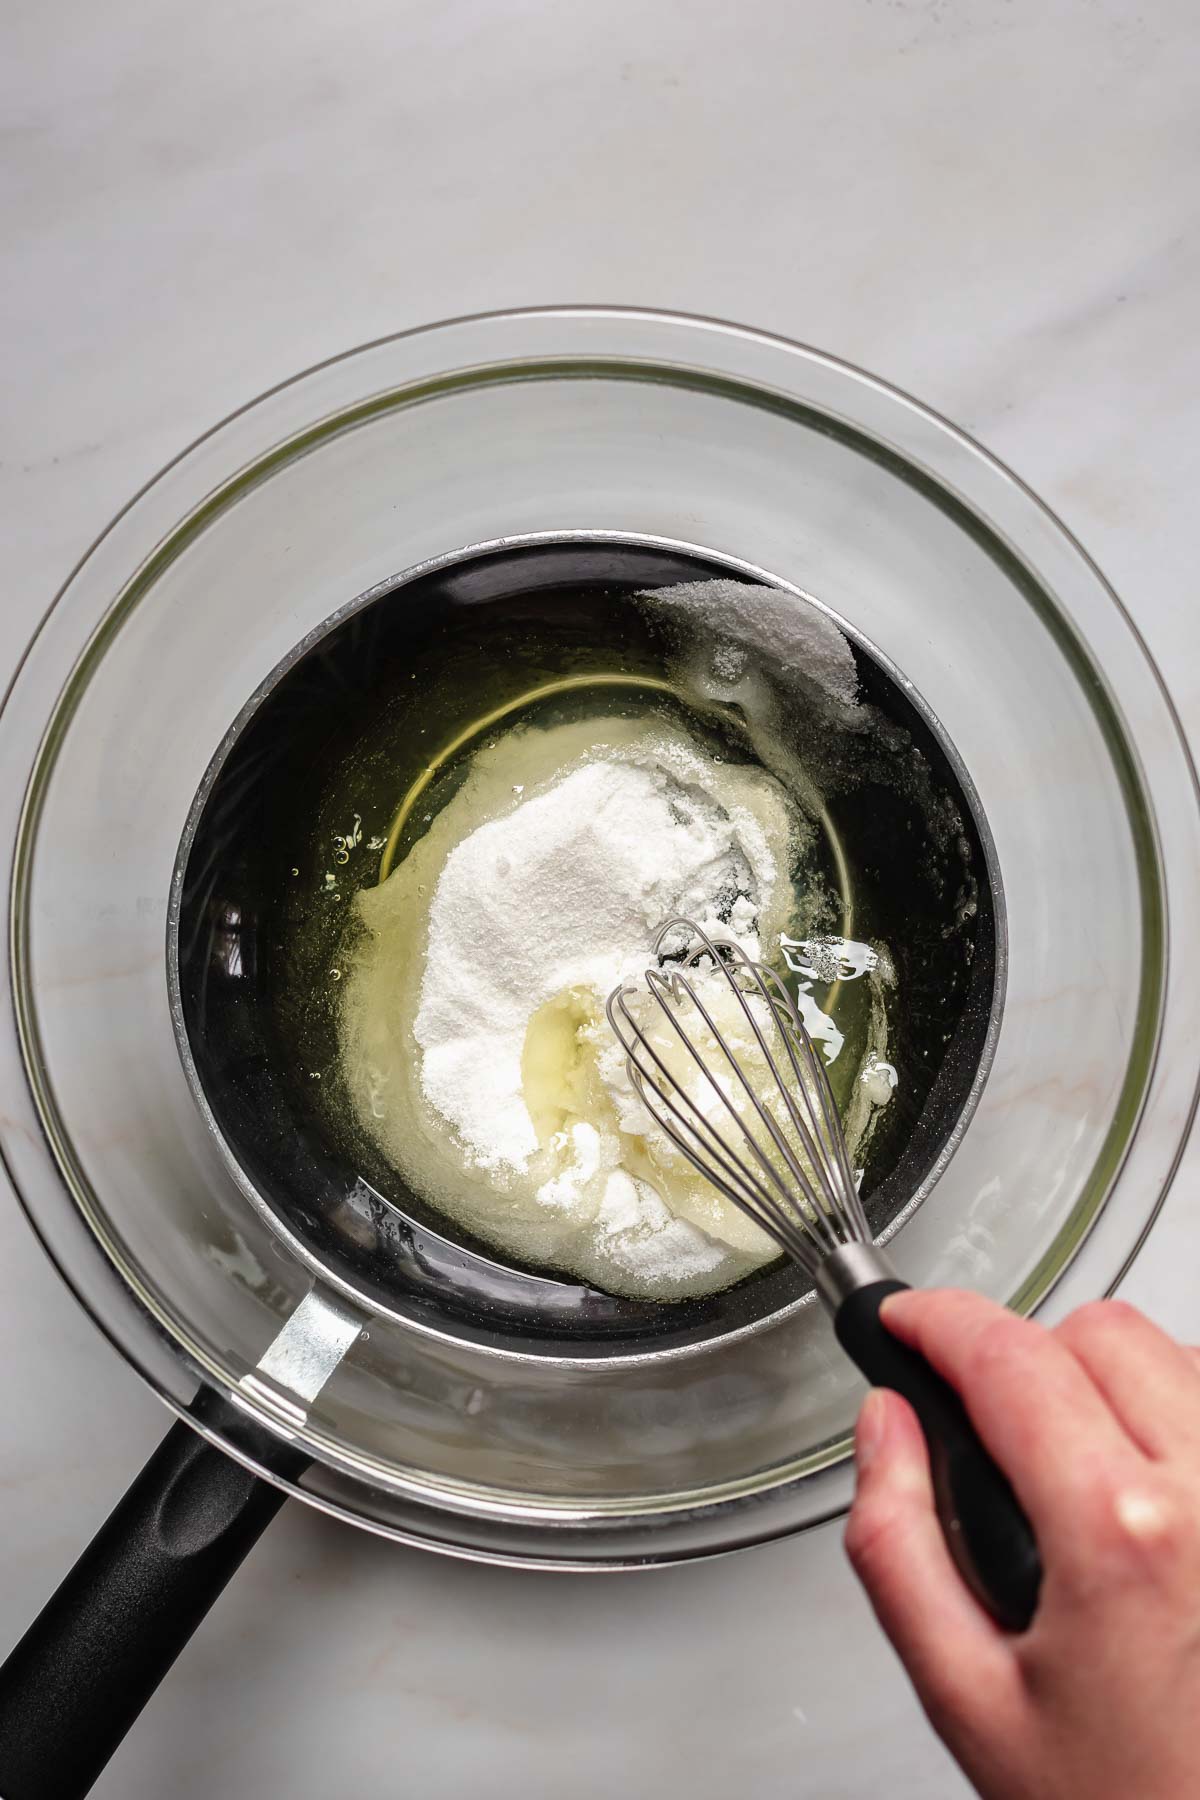 Hand whisks egg whites and sugar in a bowl.